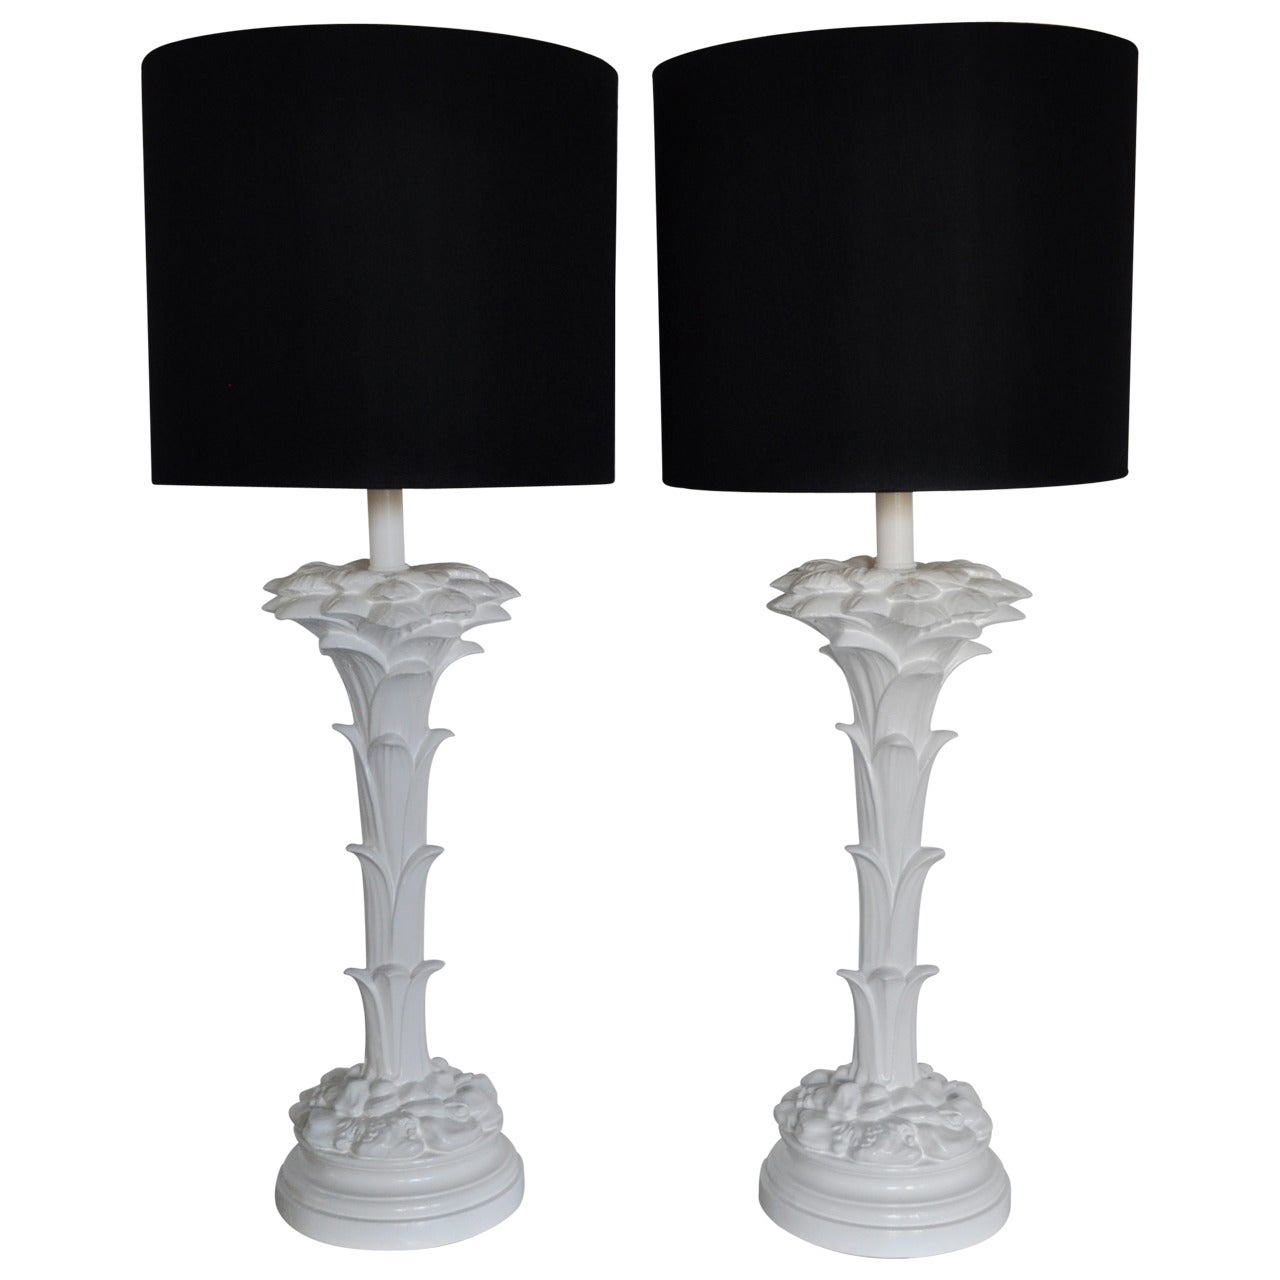 Pair of Serge Roche Style Palm Tree Lamps